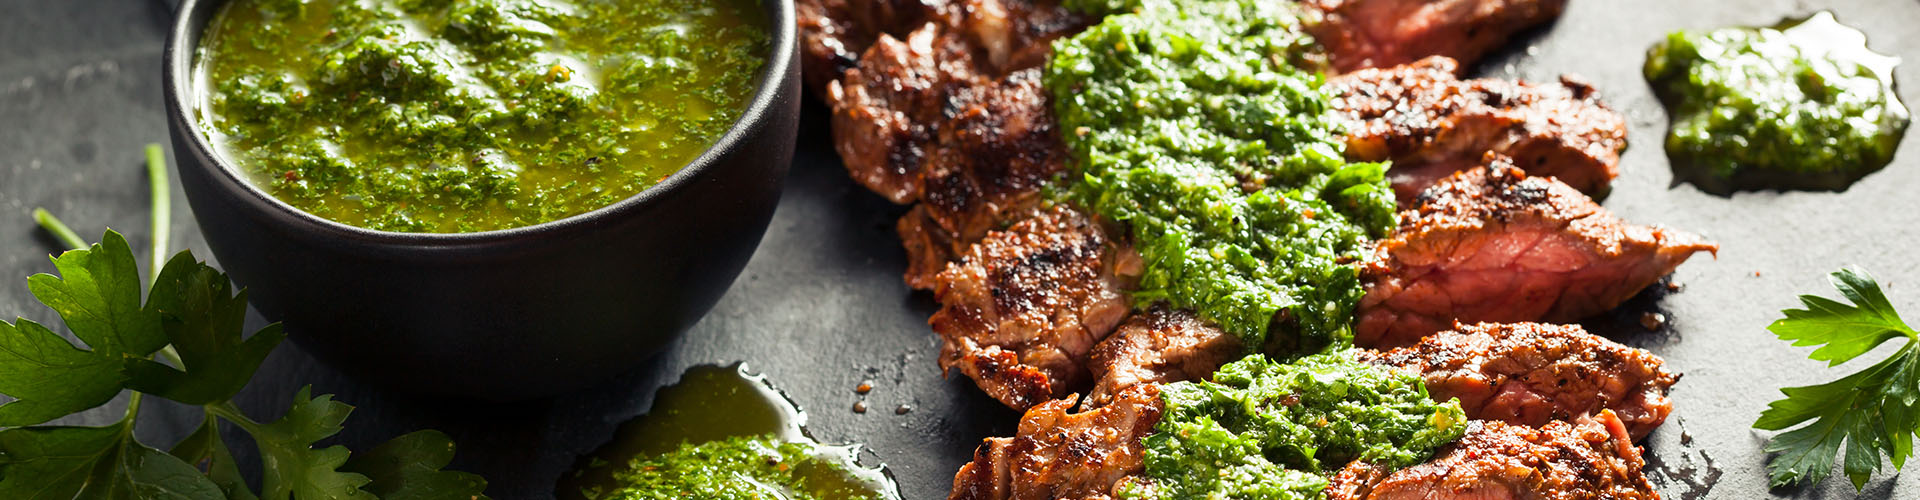 Marinated skirt steak for recipe page